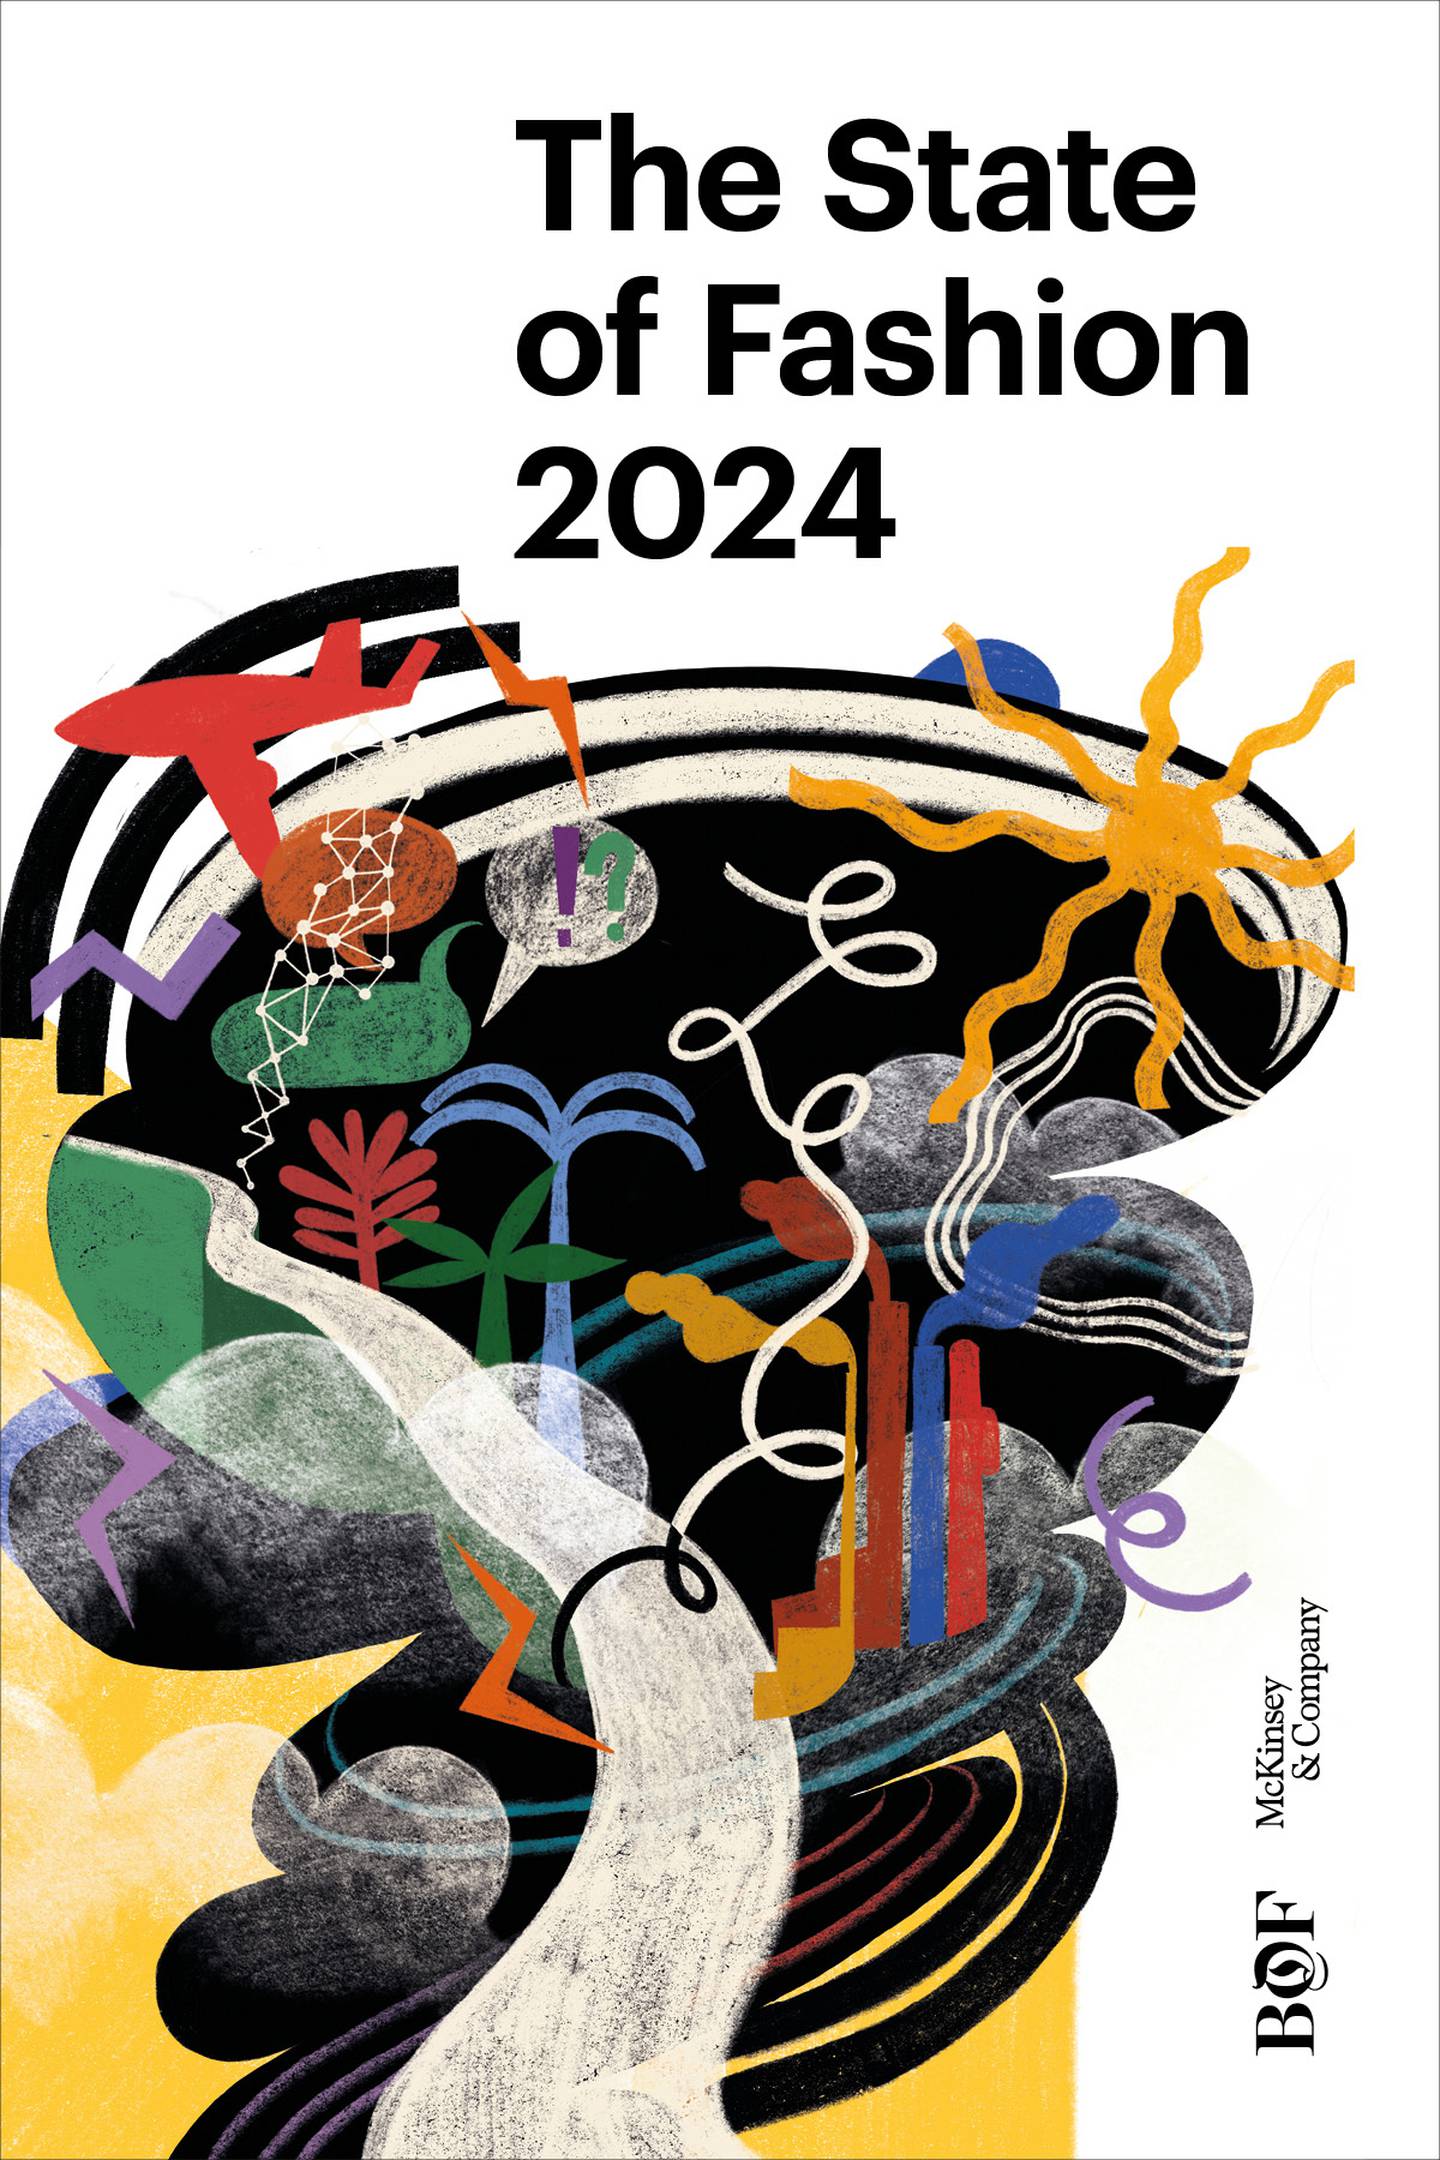 The State of Fashion 2024 report cover